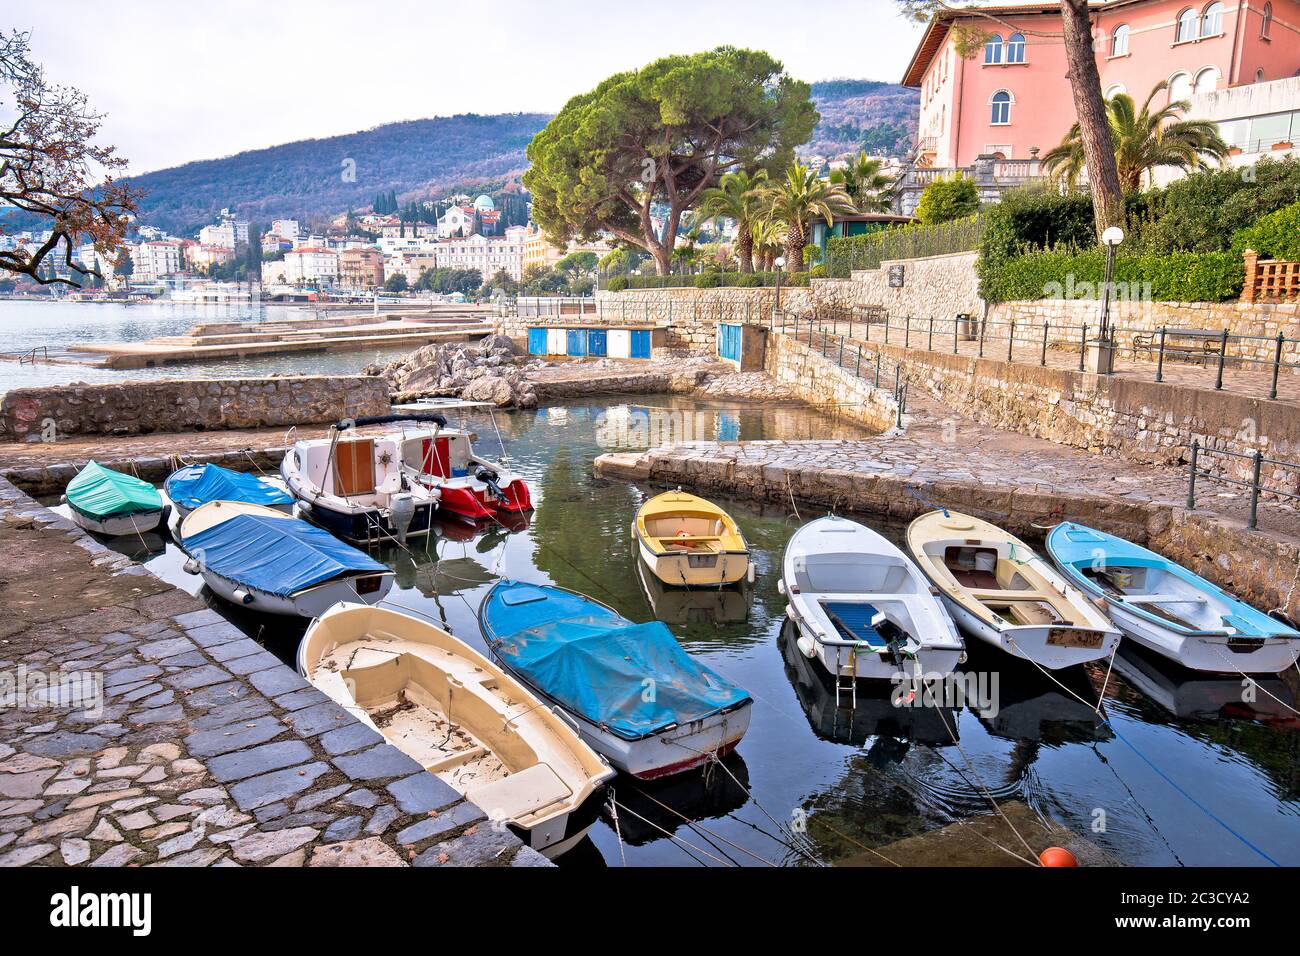 Town of Opatija small harbor on Lungomare walkway view, Stock Photo